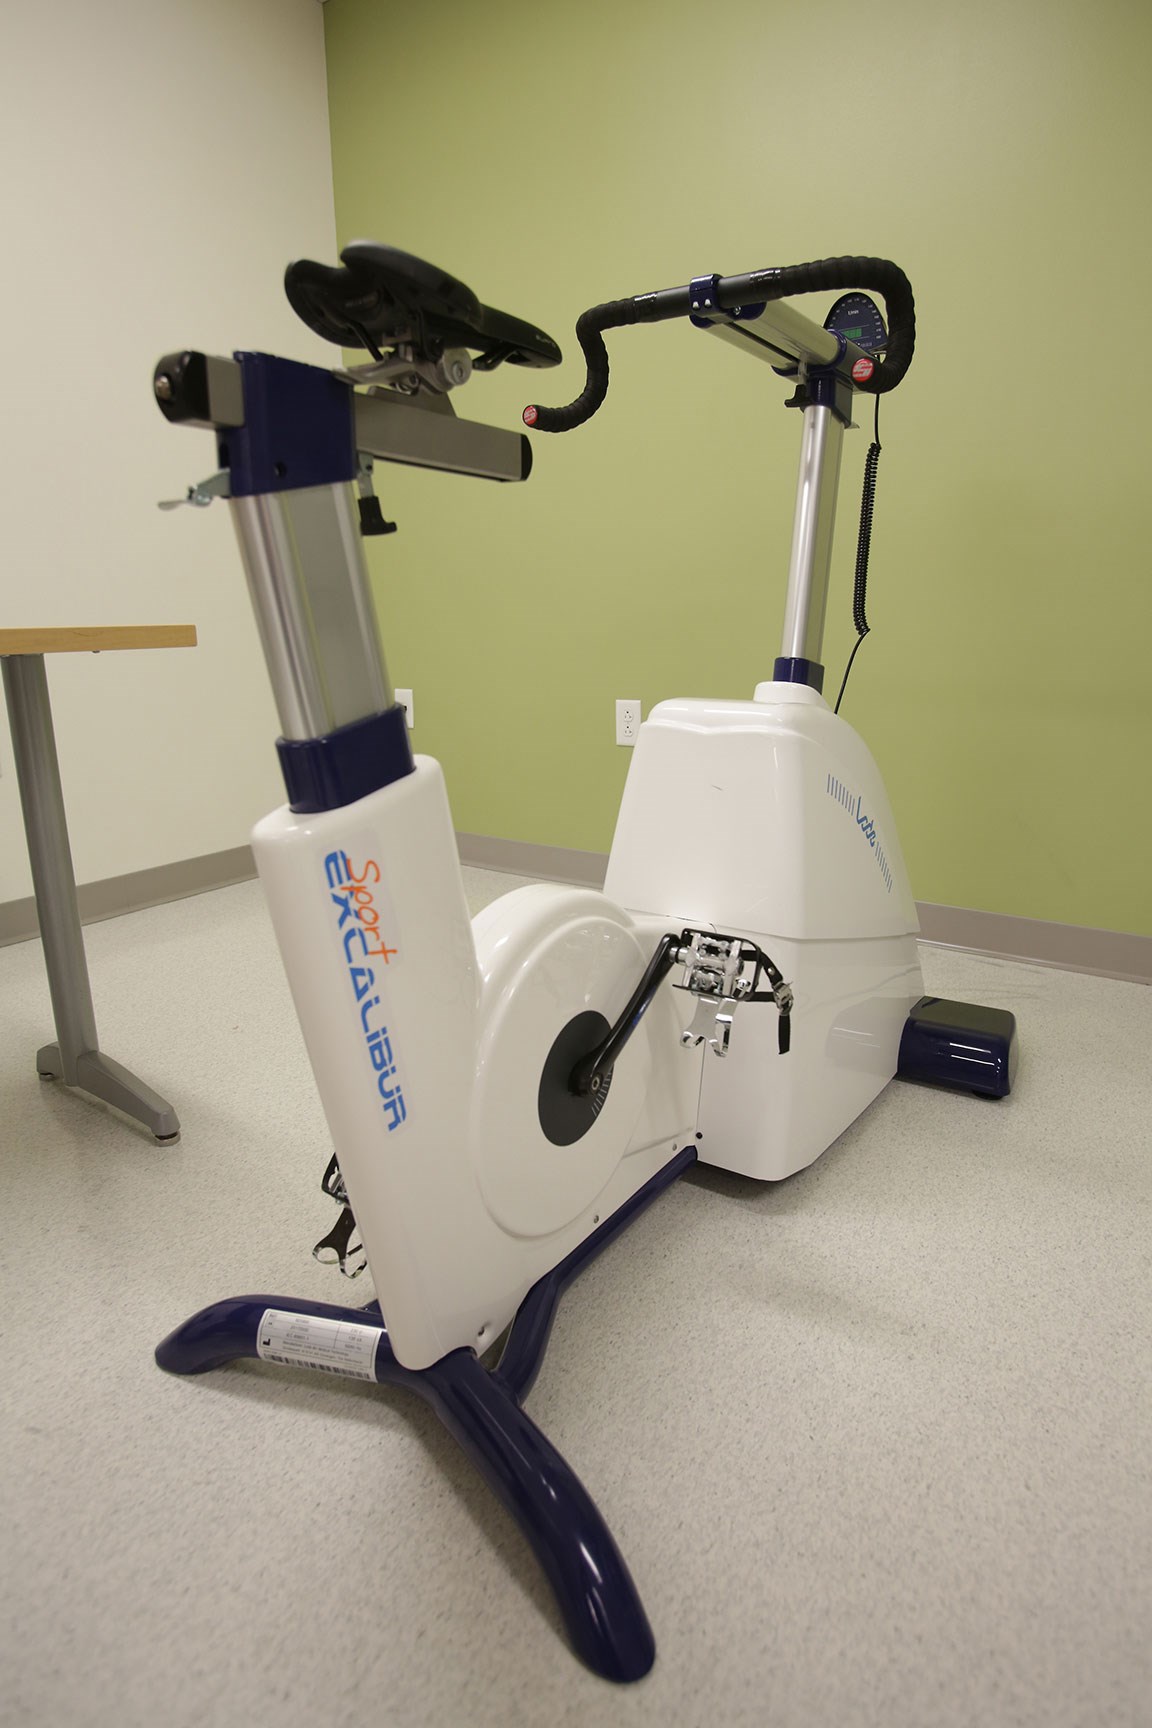 LODE EXCALIBUR SPORT The Lode Excalibur Sport is the gold standard in cycle ergometry and have RS232 protocol compatibility with our COSMED Quark CPET Metabolic Measurement System.